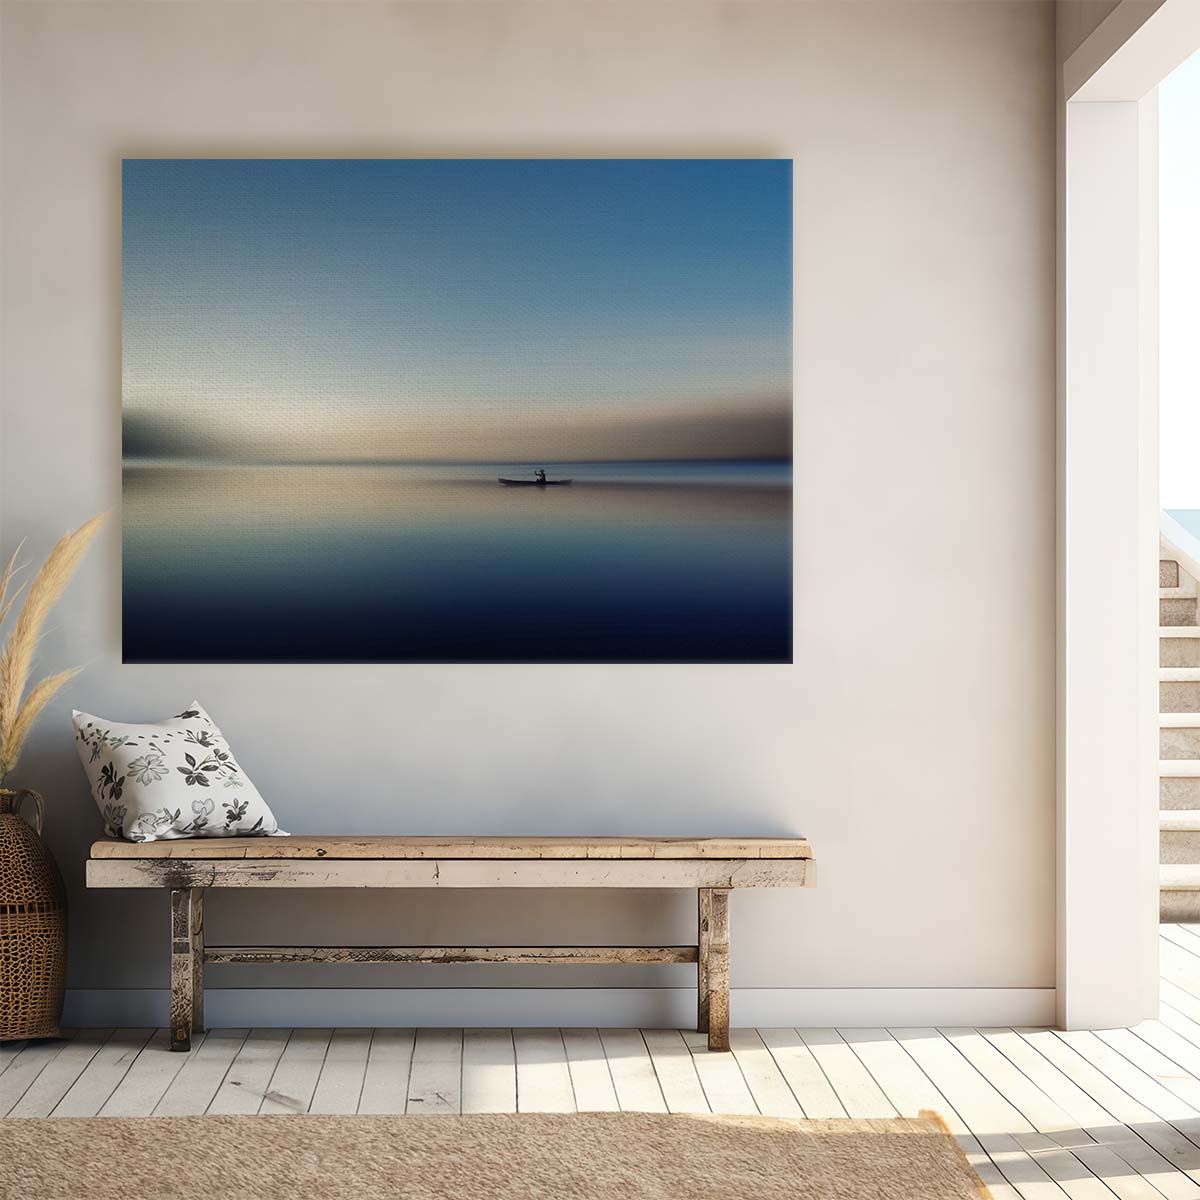 Serene Toba Lake Rowboat Solitude Wall Art by Luxuriance Designs. Made in USA.